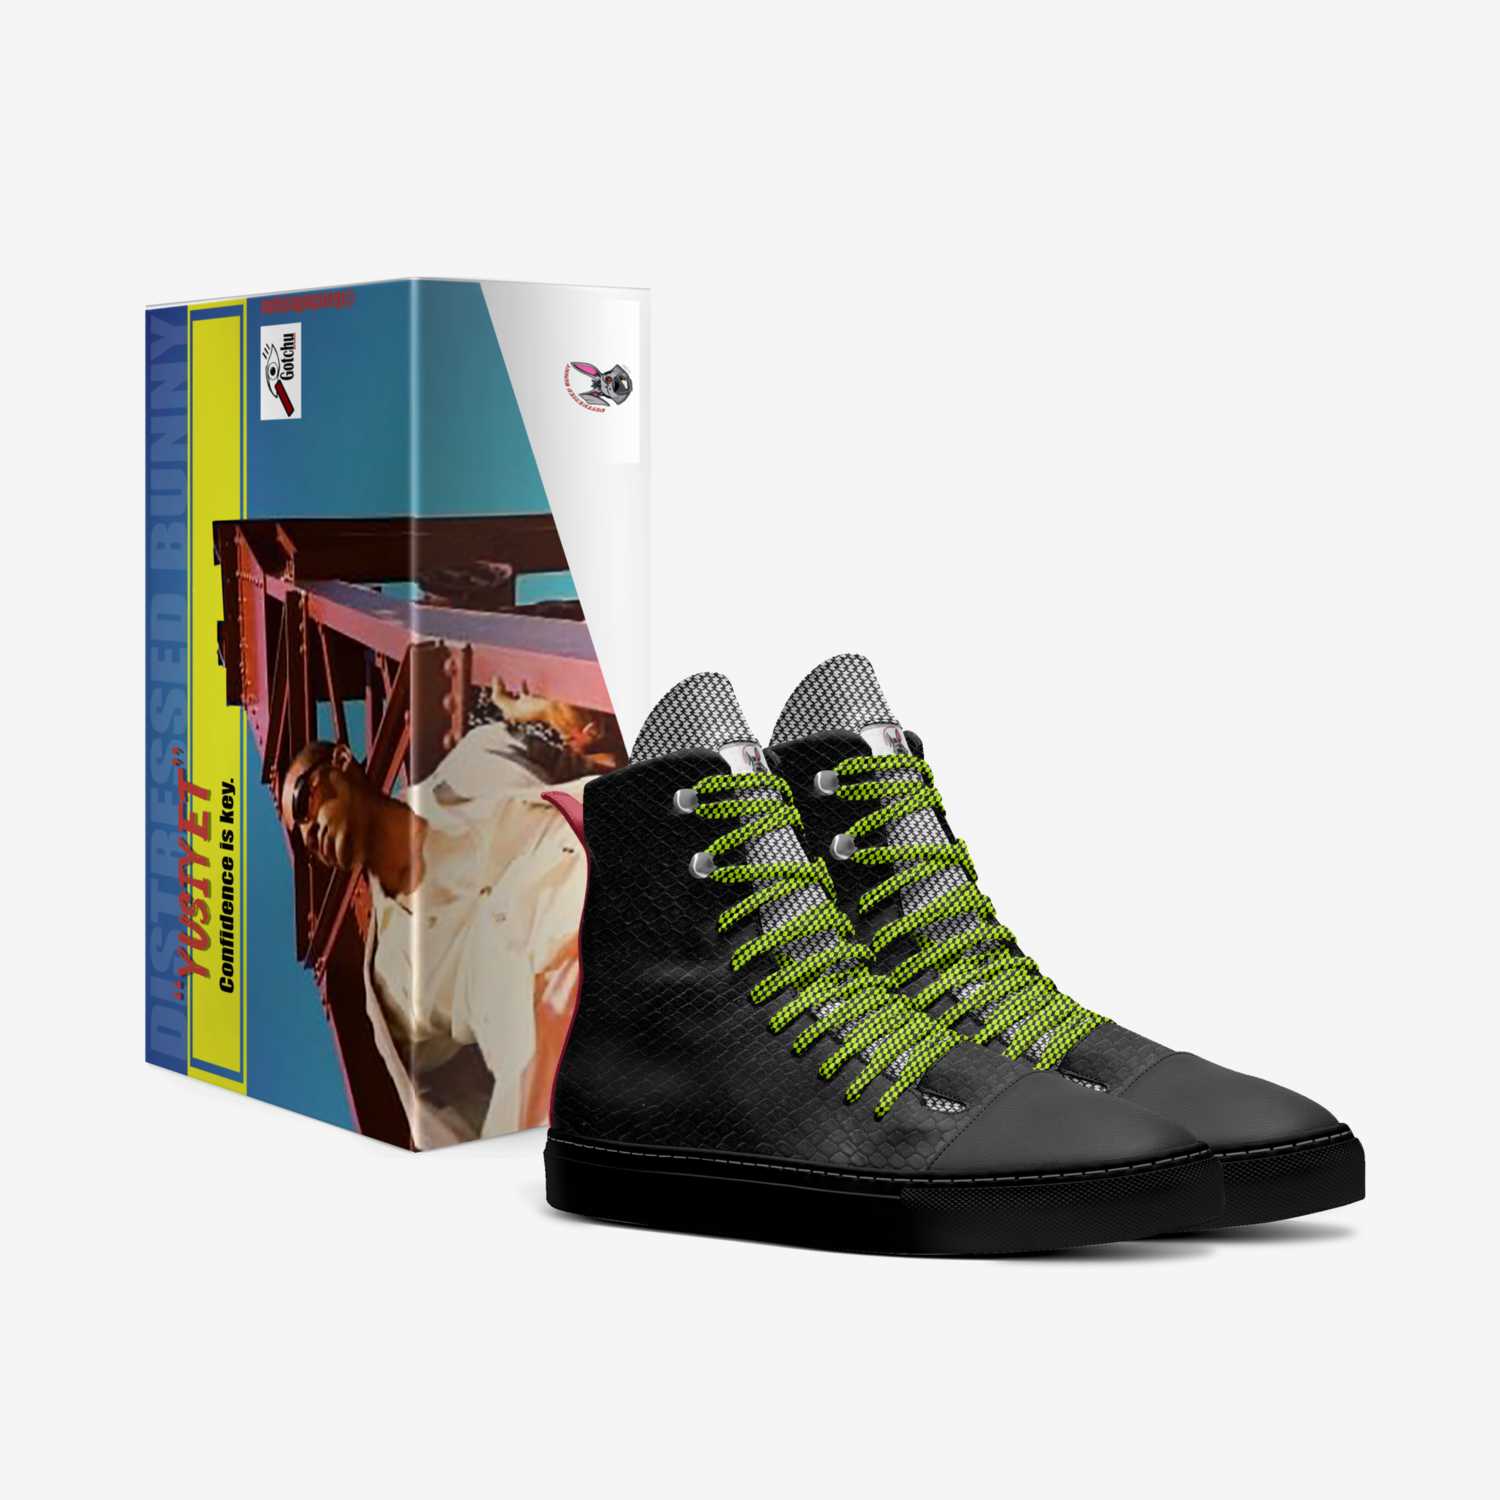 Yusiyet custom made in Italy shoes by Gene Anthony | Box view